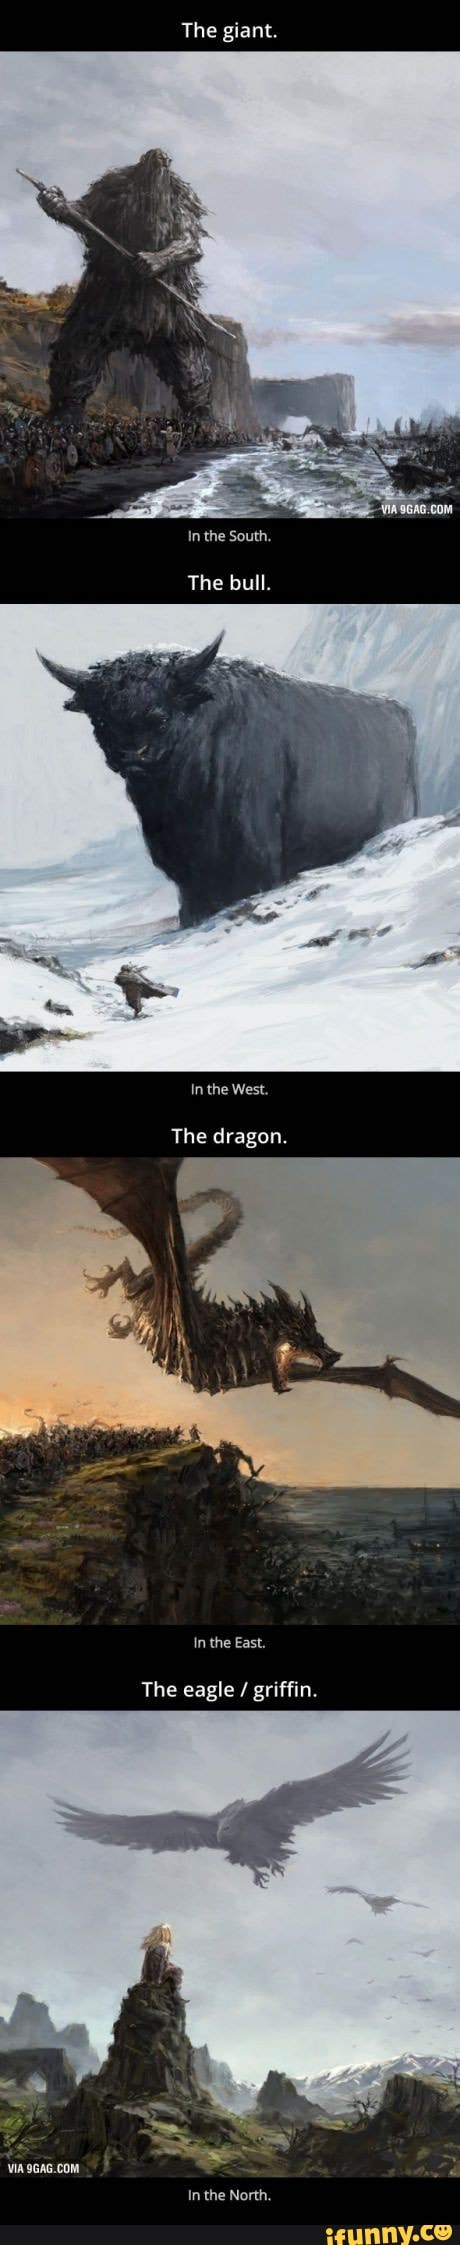 Frastøde med uret Tulipaner The giant. In the South. The bull. In the West. The dragon. In the East. The  eagle / griffin. VIA 9GAG.COM. In the North. - )